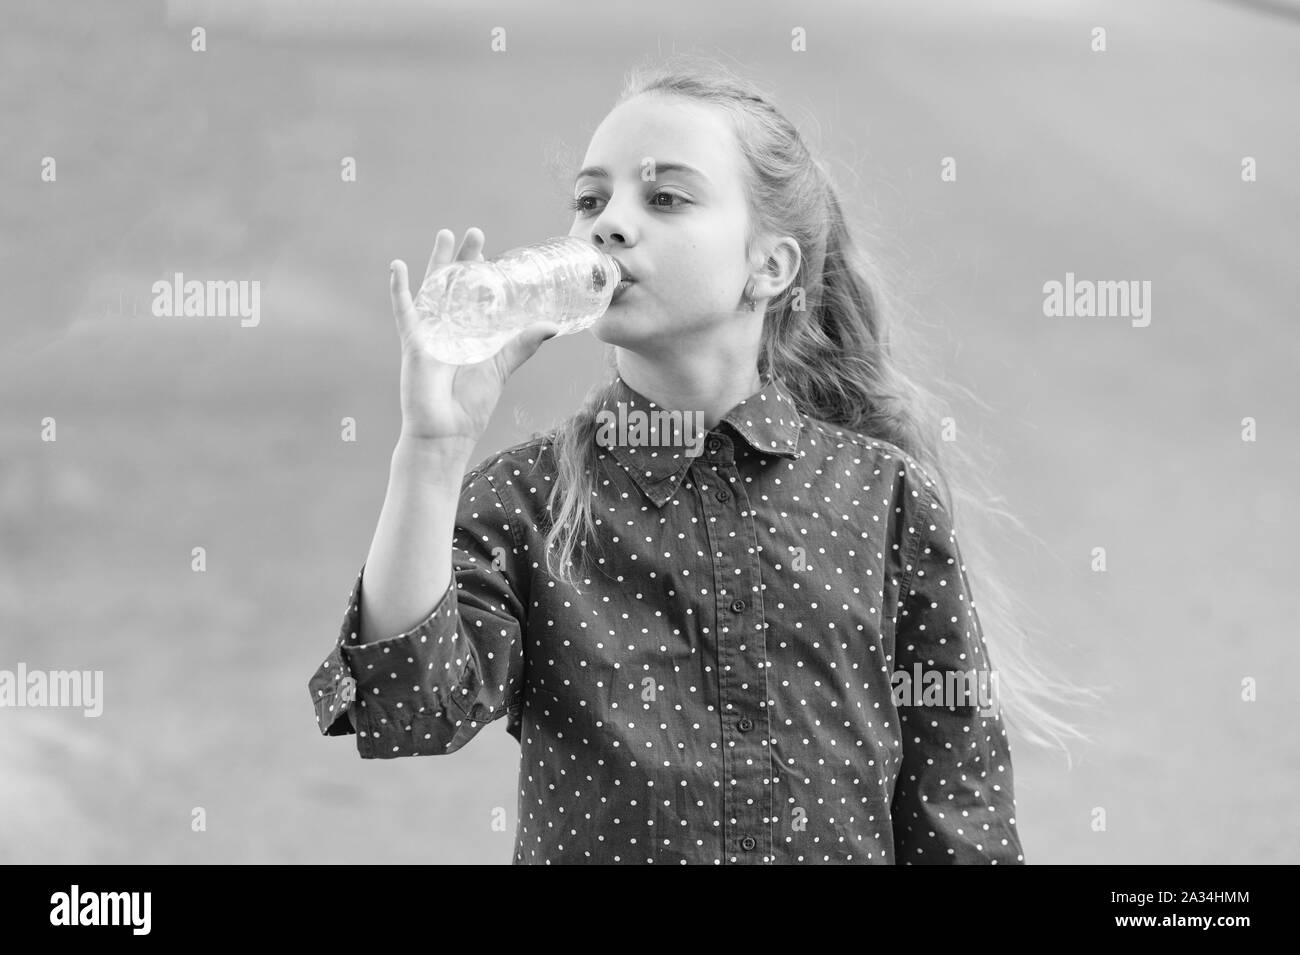 Water is life. Thirsty child drinking fresh water from plastic bottle. Little girl having a drink from water bottle. Quenching thirst with natural mineral clean water. Stock Photo